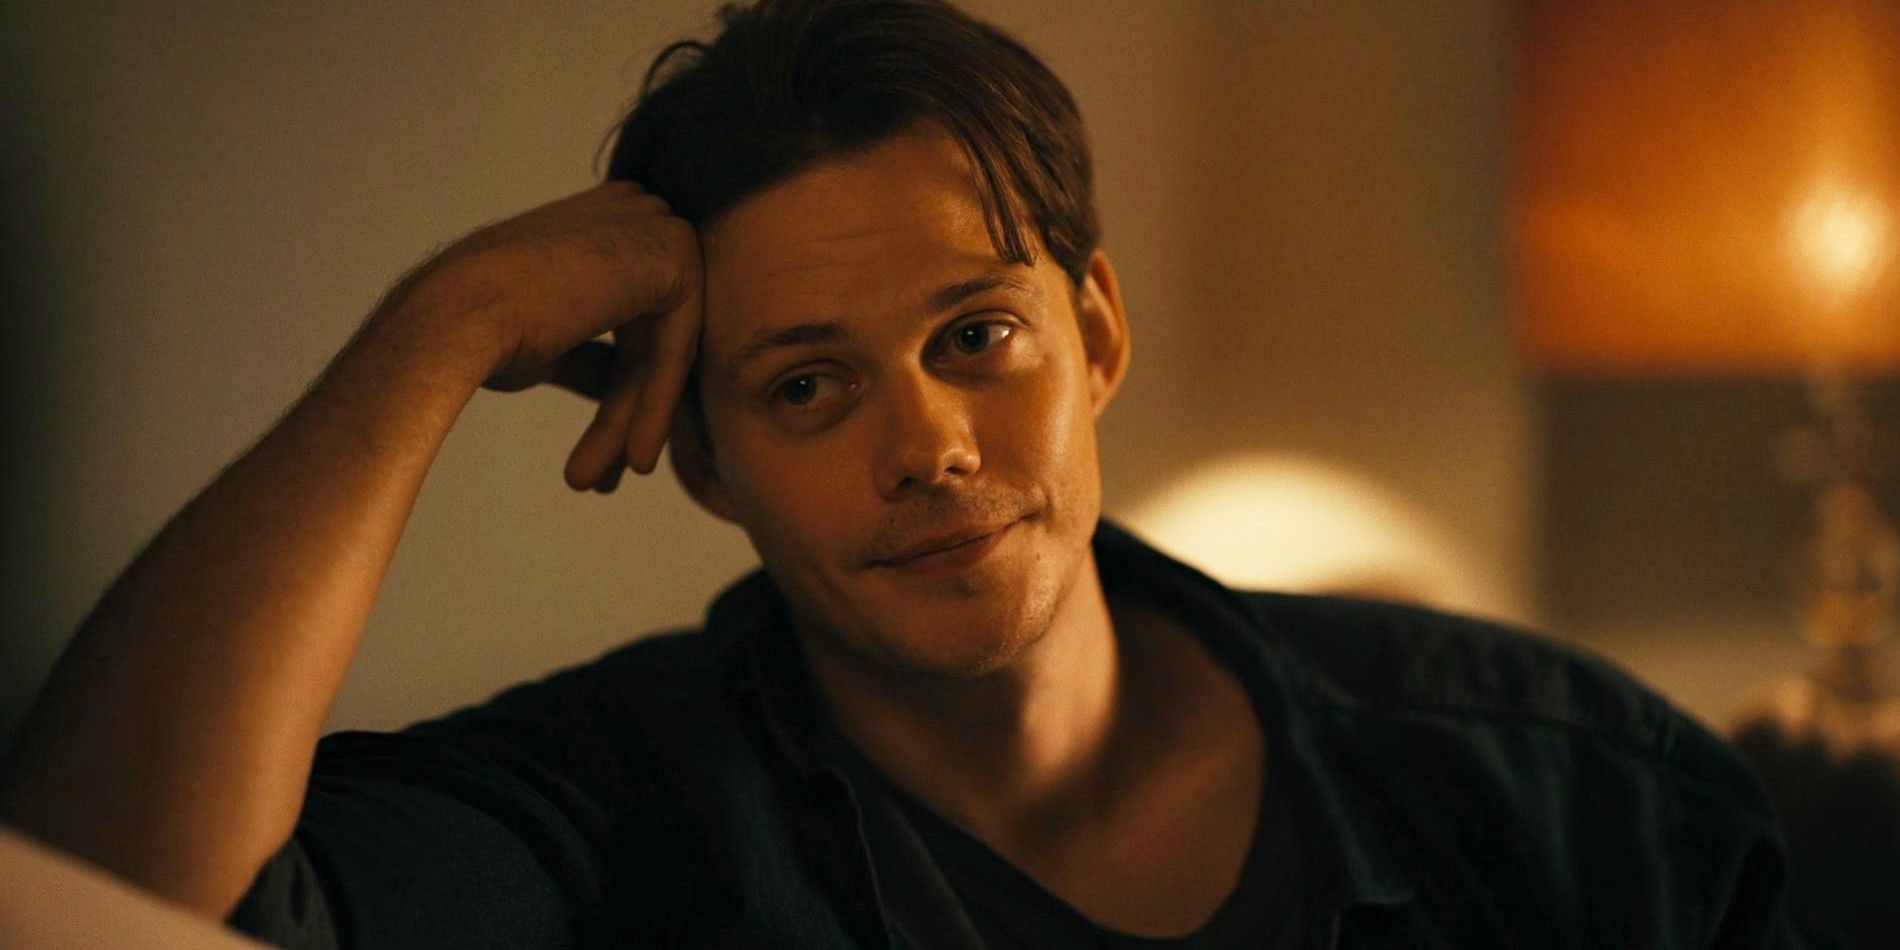 Bill Skarsgard in Barbarian smiling while sitting in the couch